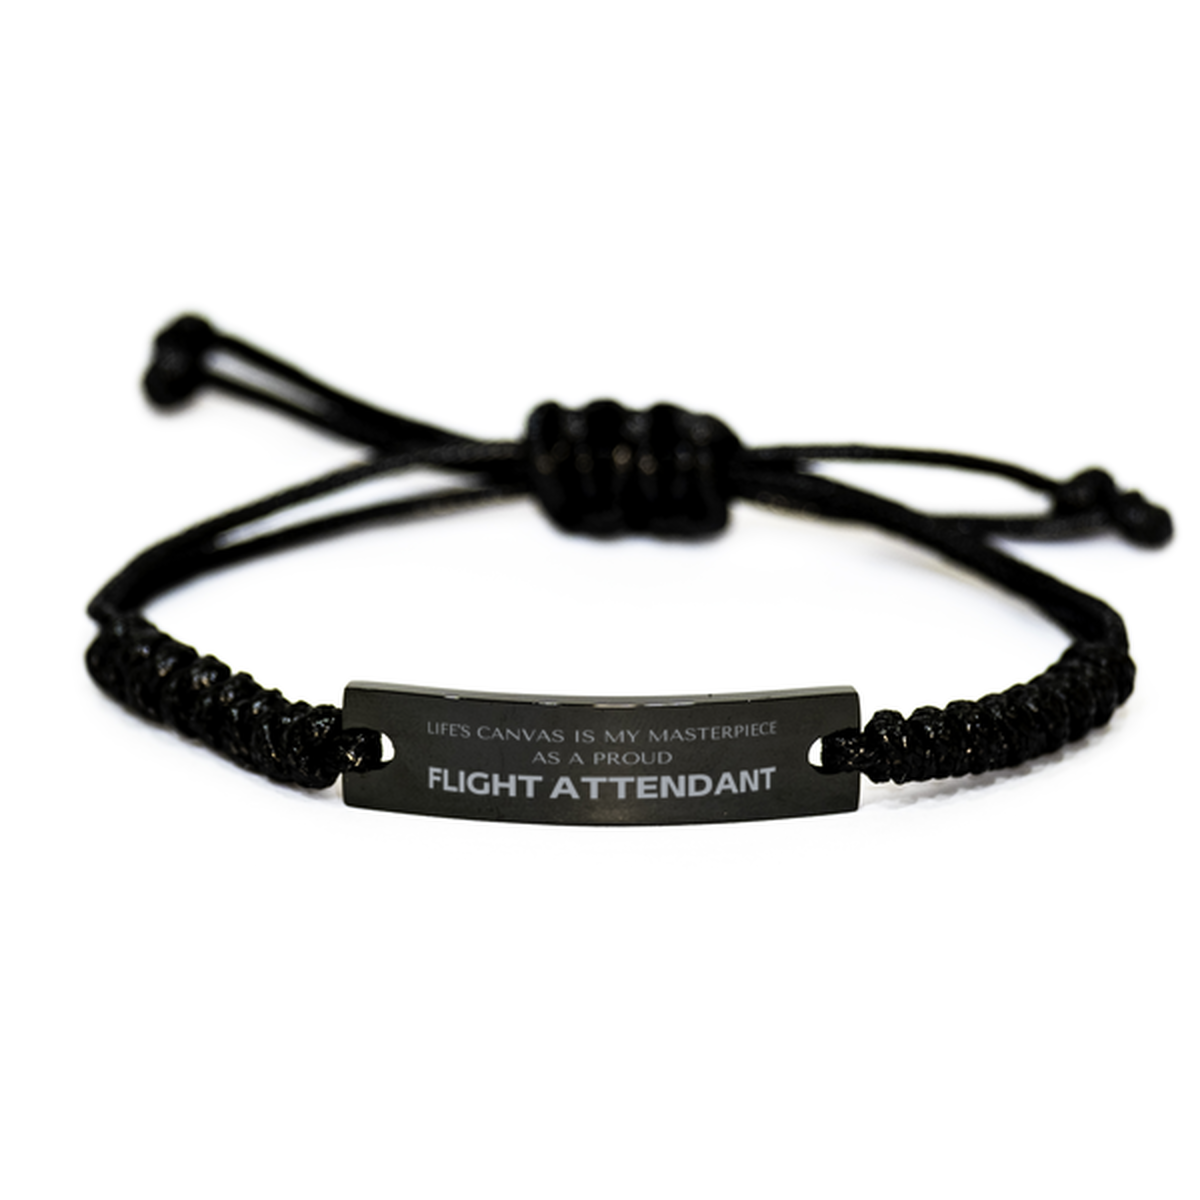 Proud Flight Attendant Gifts, Life's canvas is my masterpiece, Epic Birthday Christmas Unique Black Rope Bracelet For Flight Attendant, Coworkers, Men, Women, Friends